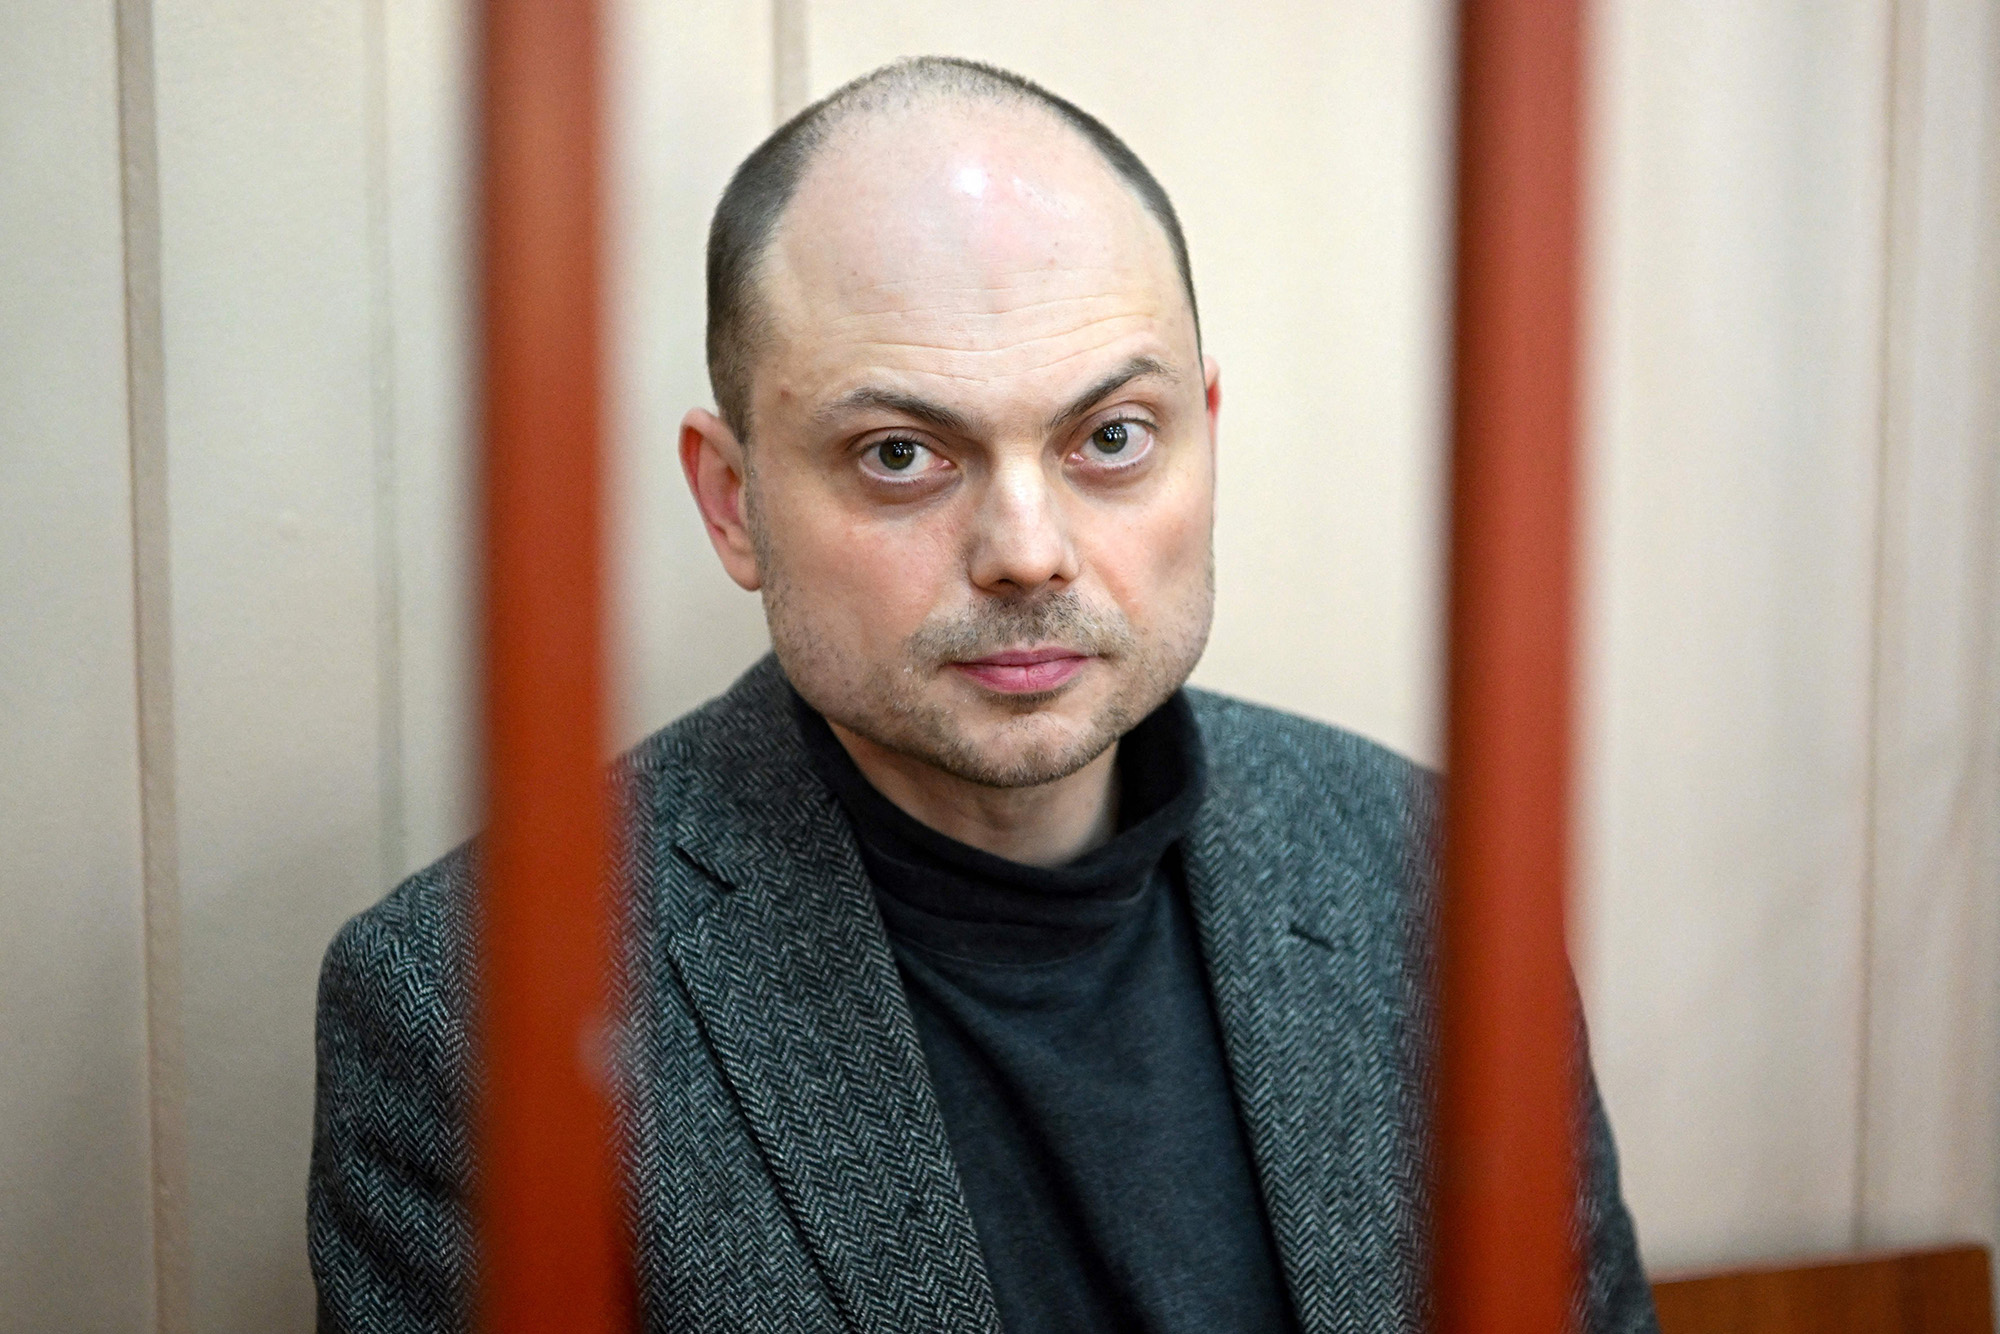 Russian opposition activist Vladimir Kara-Murza sits on a bench inside a defendants' cage during a hearing at the Basmanny court in Moscow, Russia, on October 10, 2022.